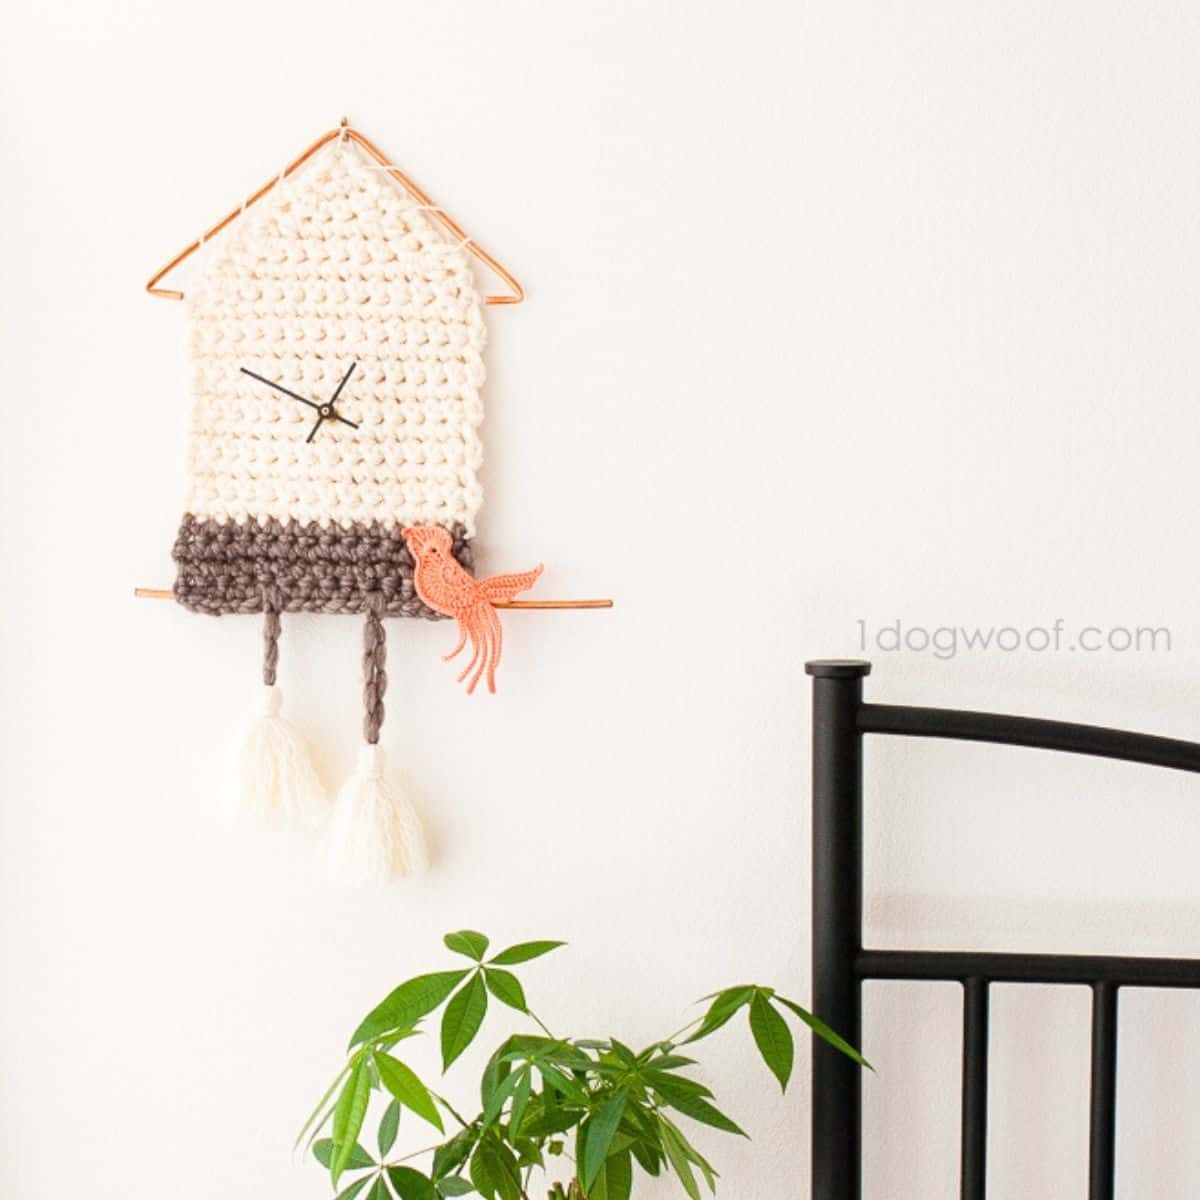 cute crochet clock with a little crochet bird perched on it hanging next to a bed and above a plant